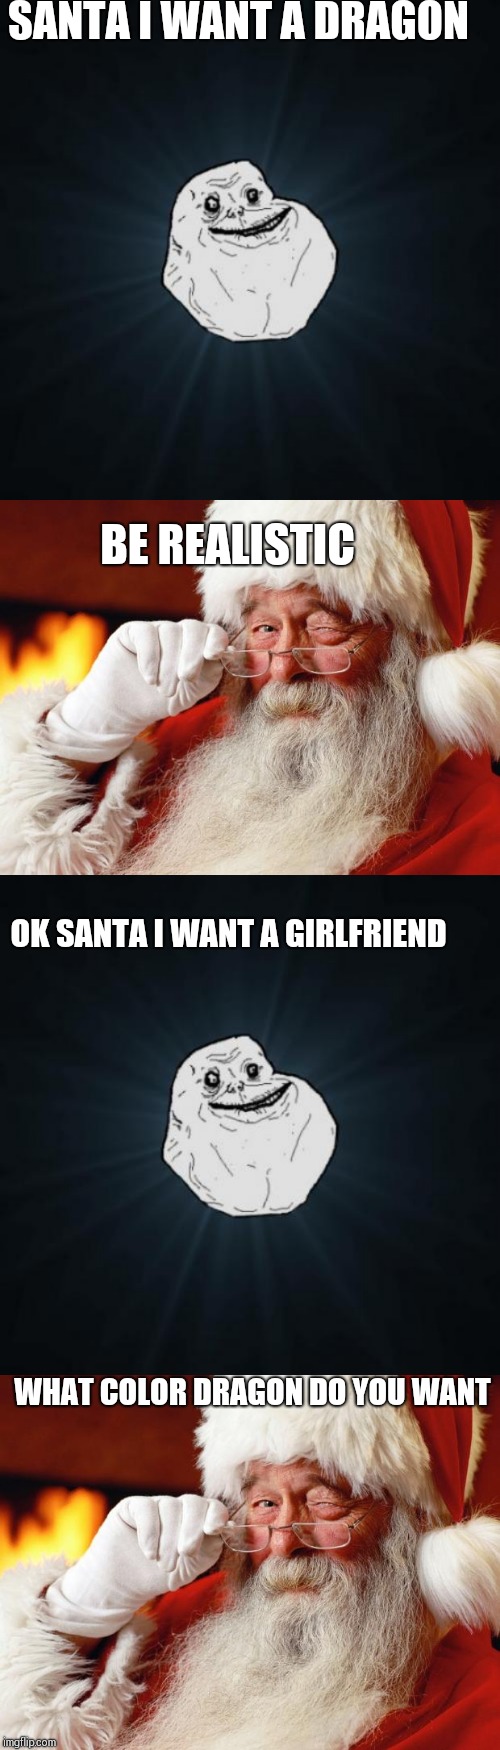 SANTA I WANT A DRAGON; BE REALISTIC; OK SANTA I WANT A GIRLFRIEND; WHAT COLOR DRAGON DO YOU WANT | image tagged in memes,forever alone,santa | made w/ Imgflip meme maker